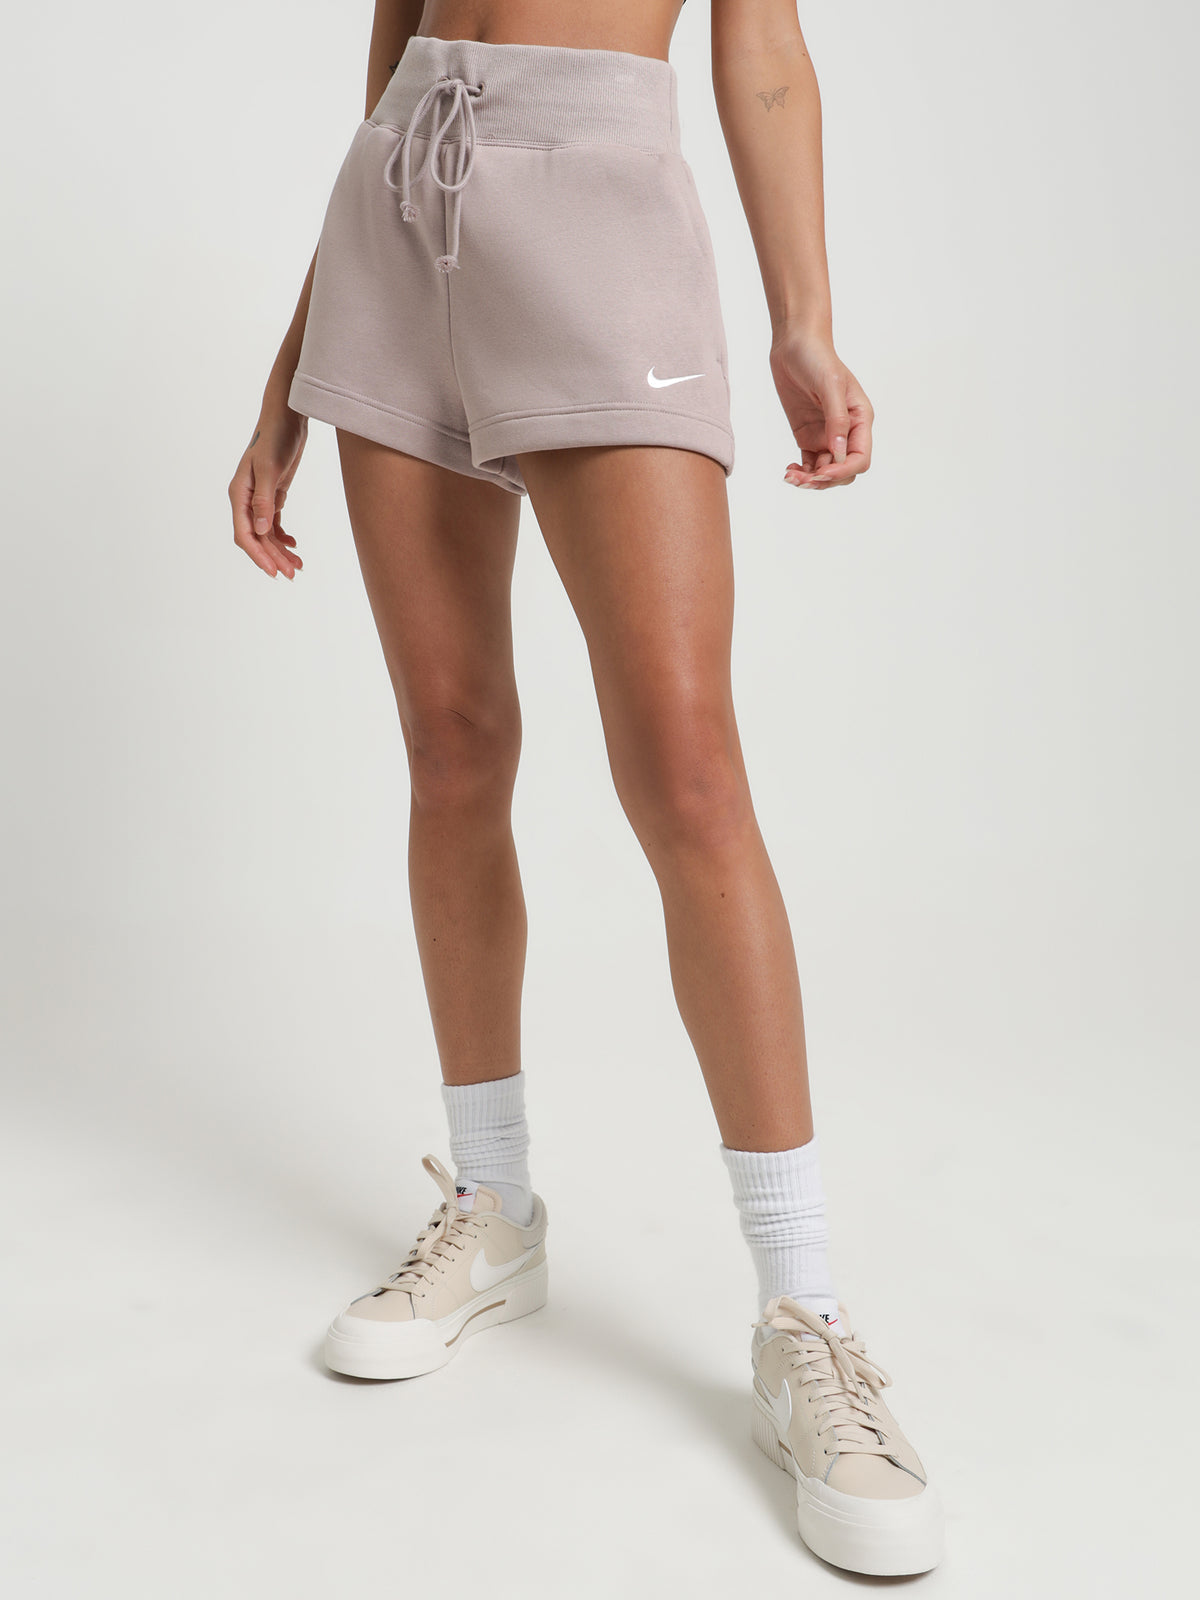 Shorts Phoenix Sportswear in - Store Fleece Taupe Glue Highrise Diffused